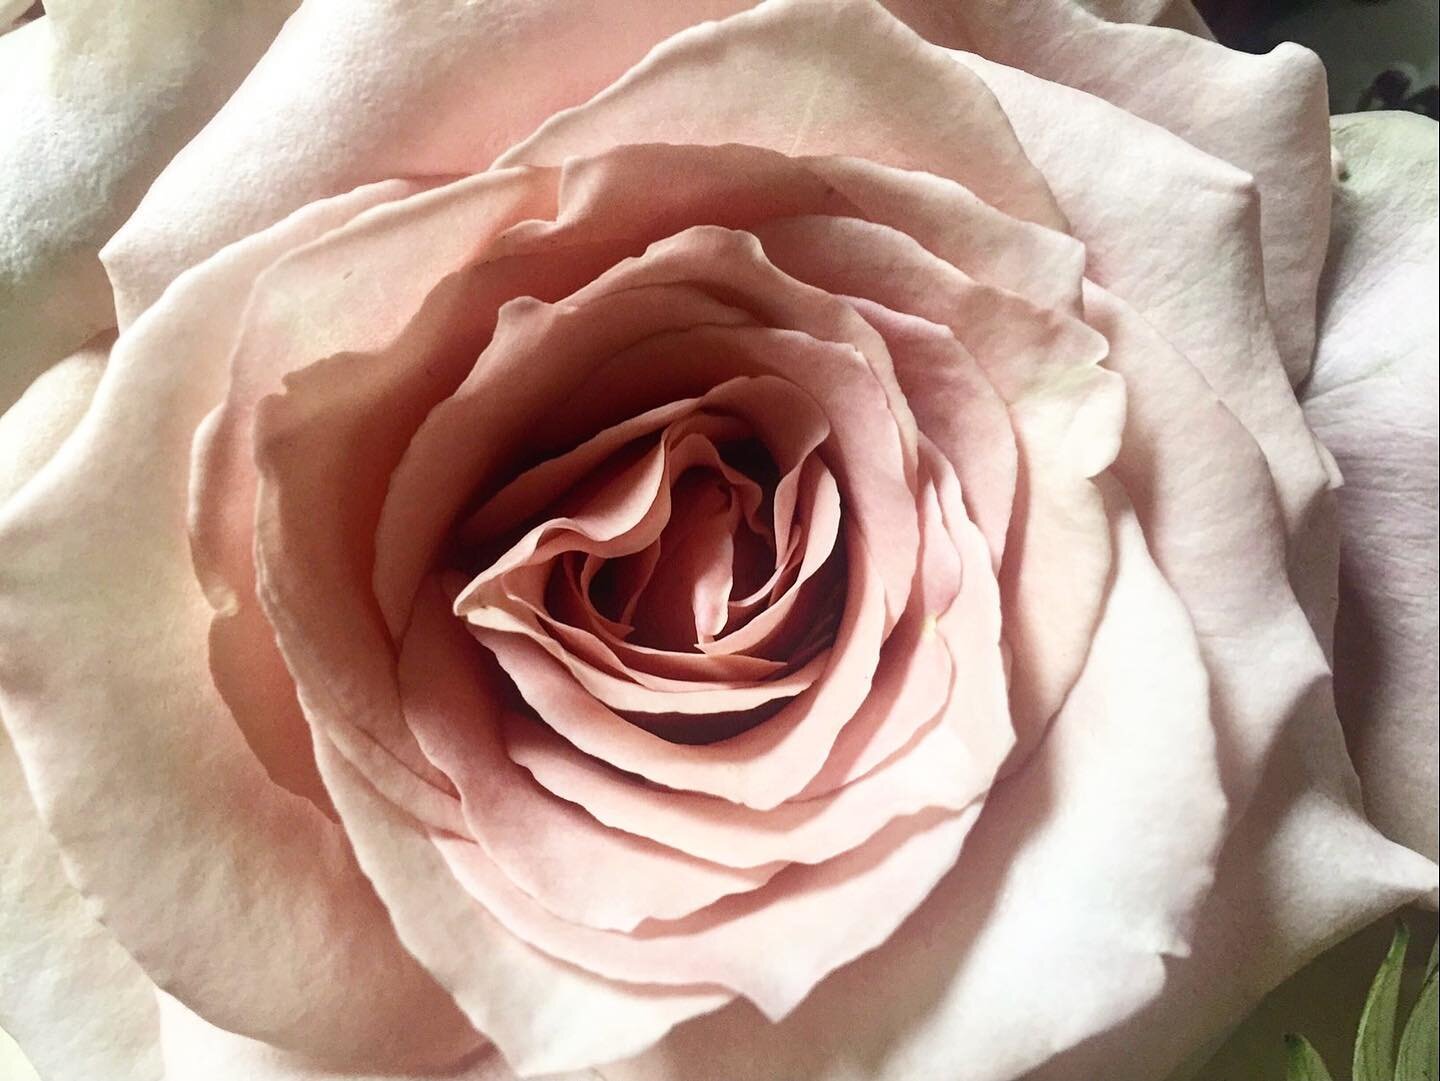 The perfection of one bloom
💗 Sending love 
#valentines #petalsandblooms #rose #closeup #prettylittlething #simplepleasures